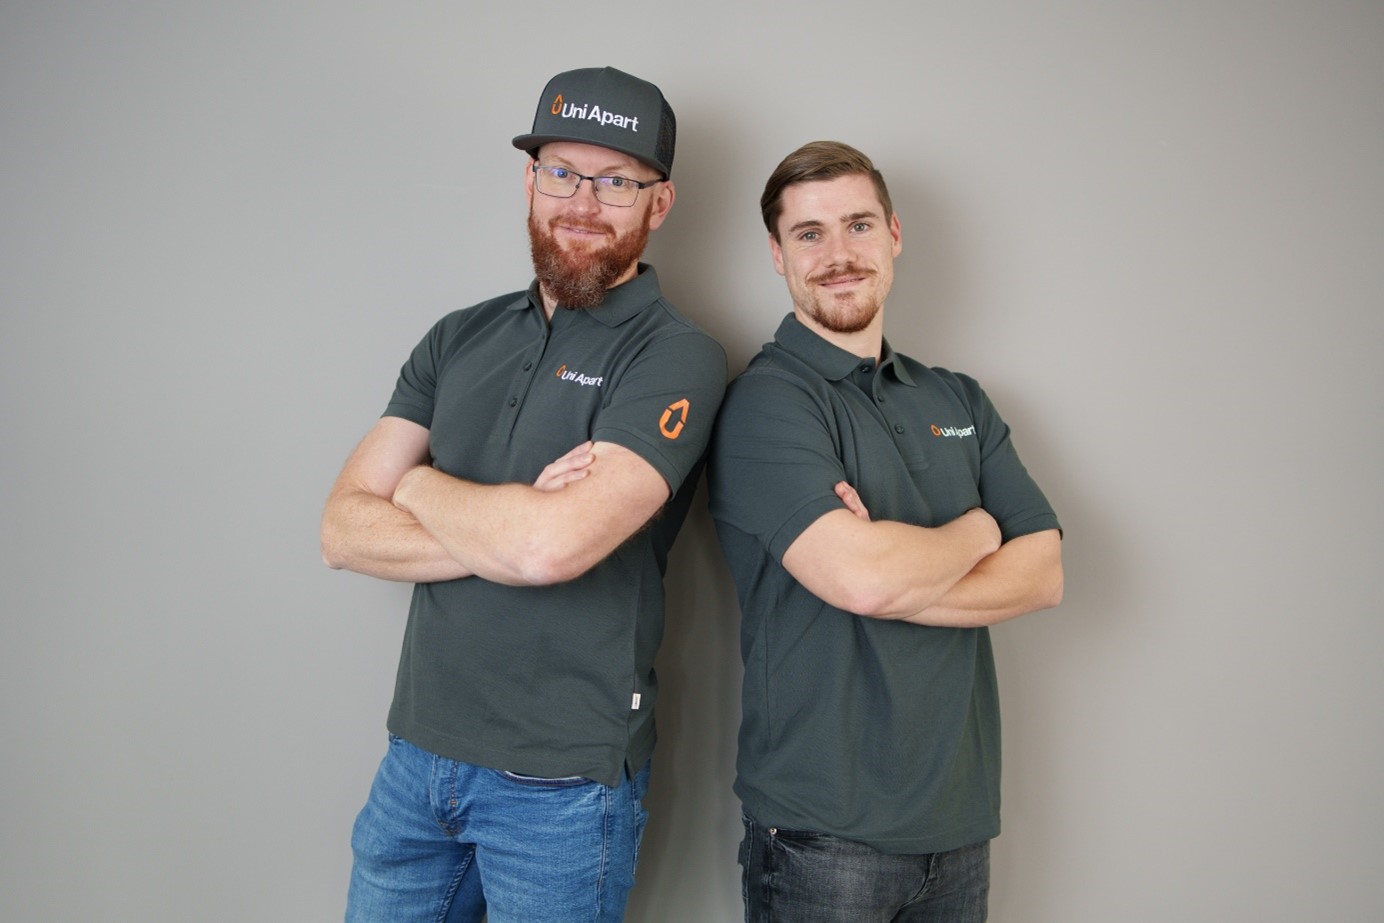 Reinforcement for the Uni Apart team: two new employees join the Uni Apart Family in the rental/administration and marketing departments